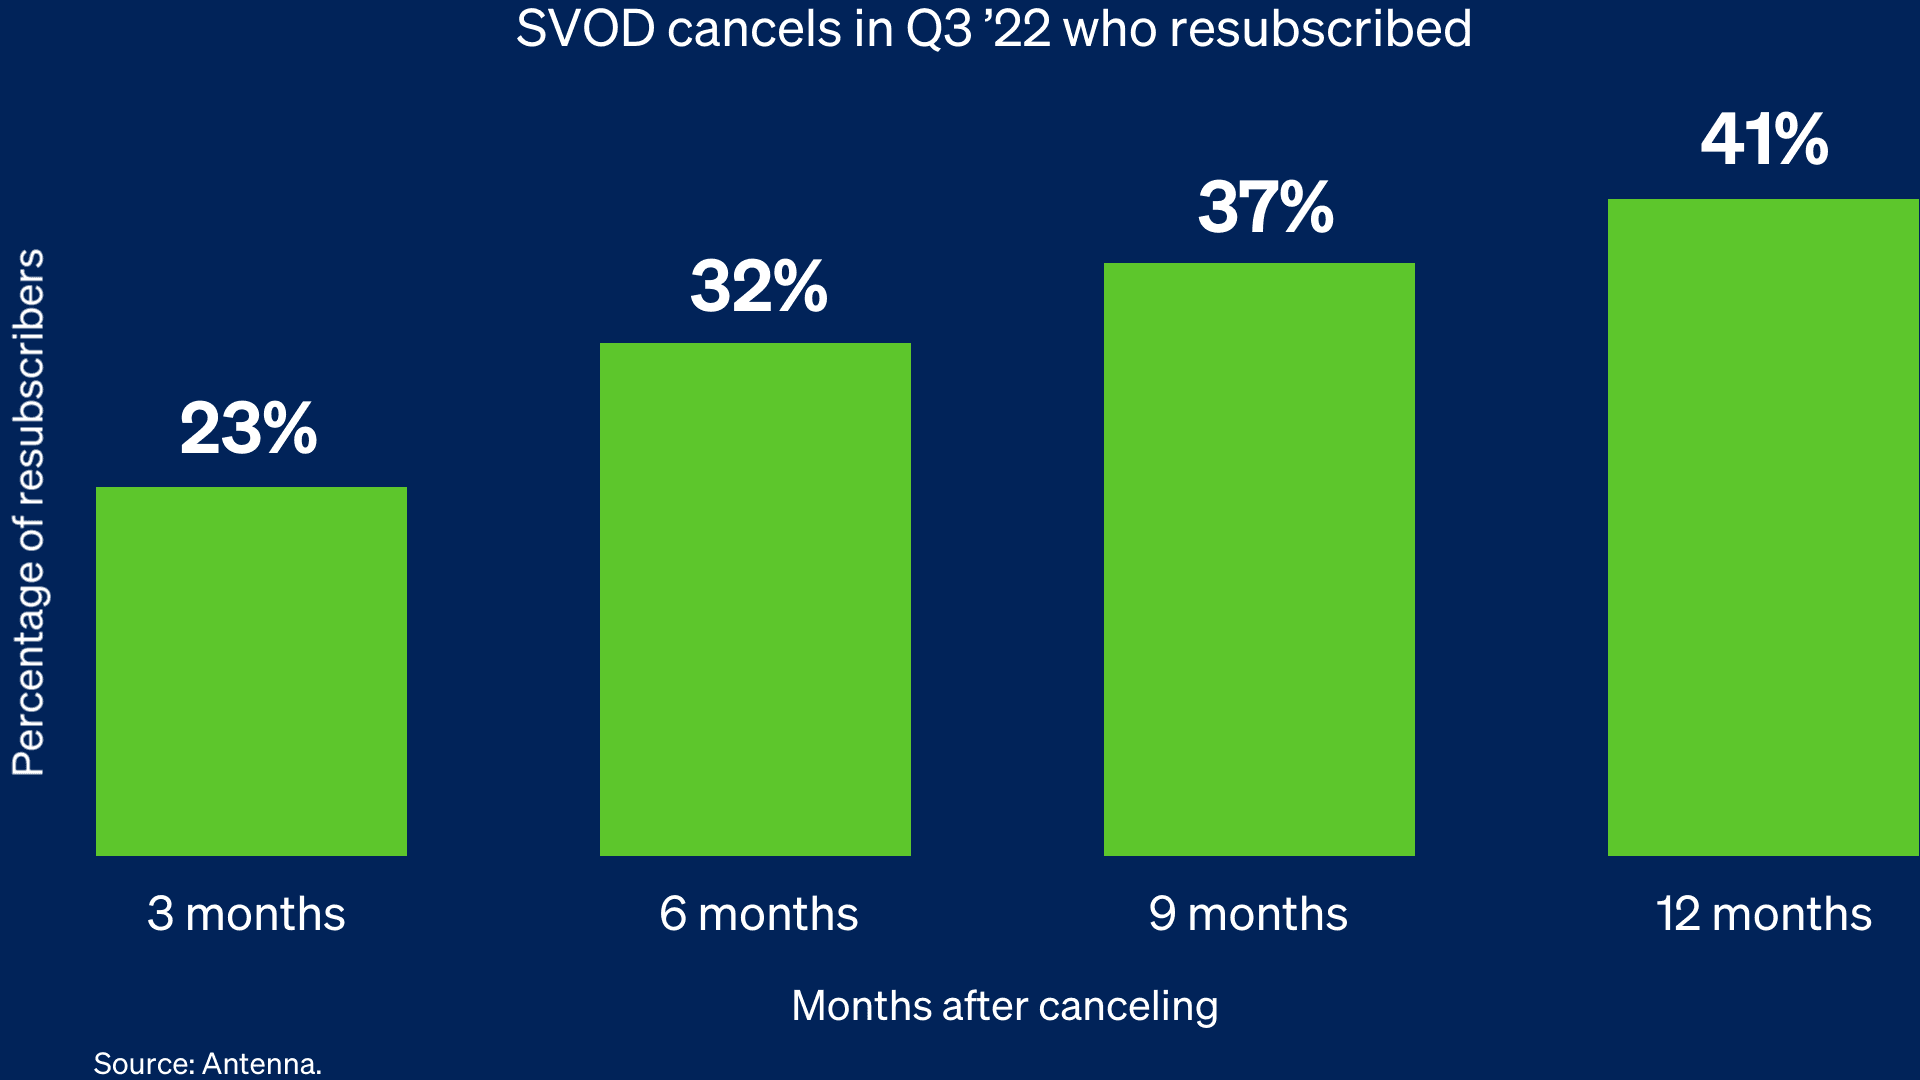 The Readout graph: SVOD cancels in Q3 '22 that resubscribed showing resubscriptions after 3, 6, 9, and 12 months.